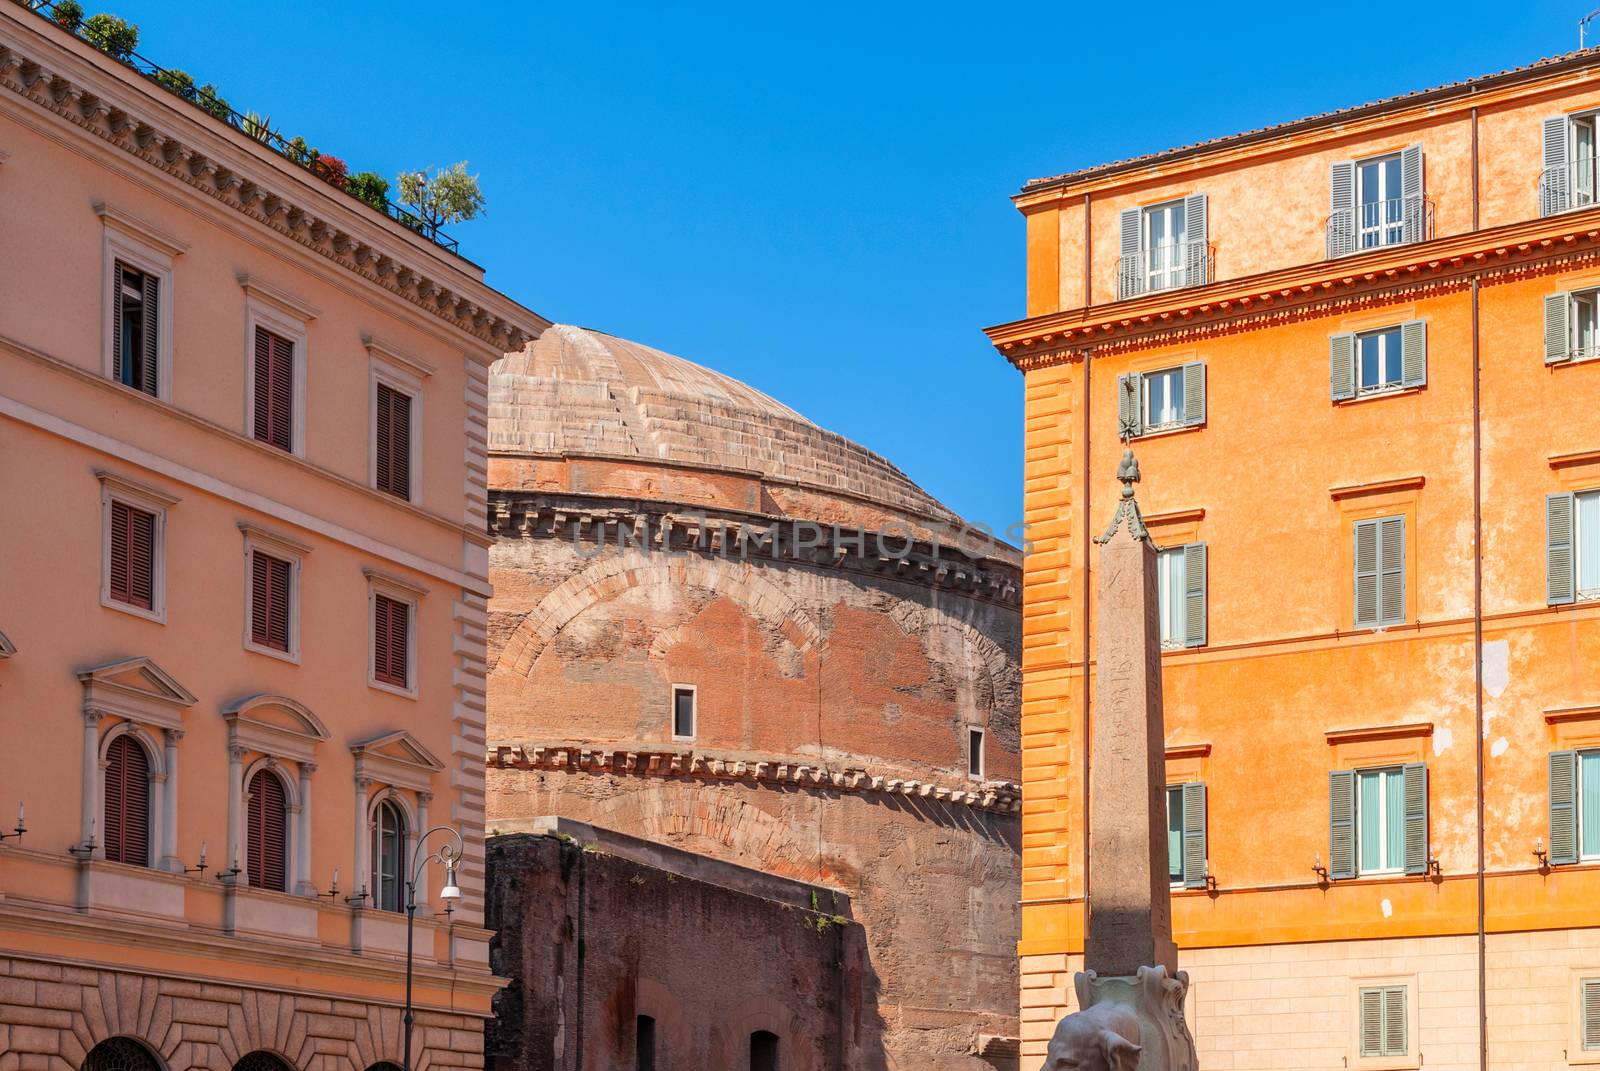 View of Pantheon and buildings near it., Rome, Italy. Ancient architecture of Rome